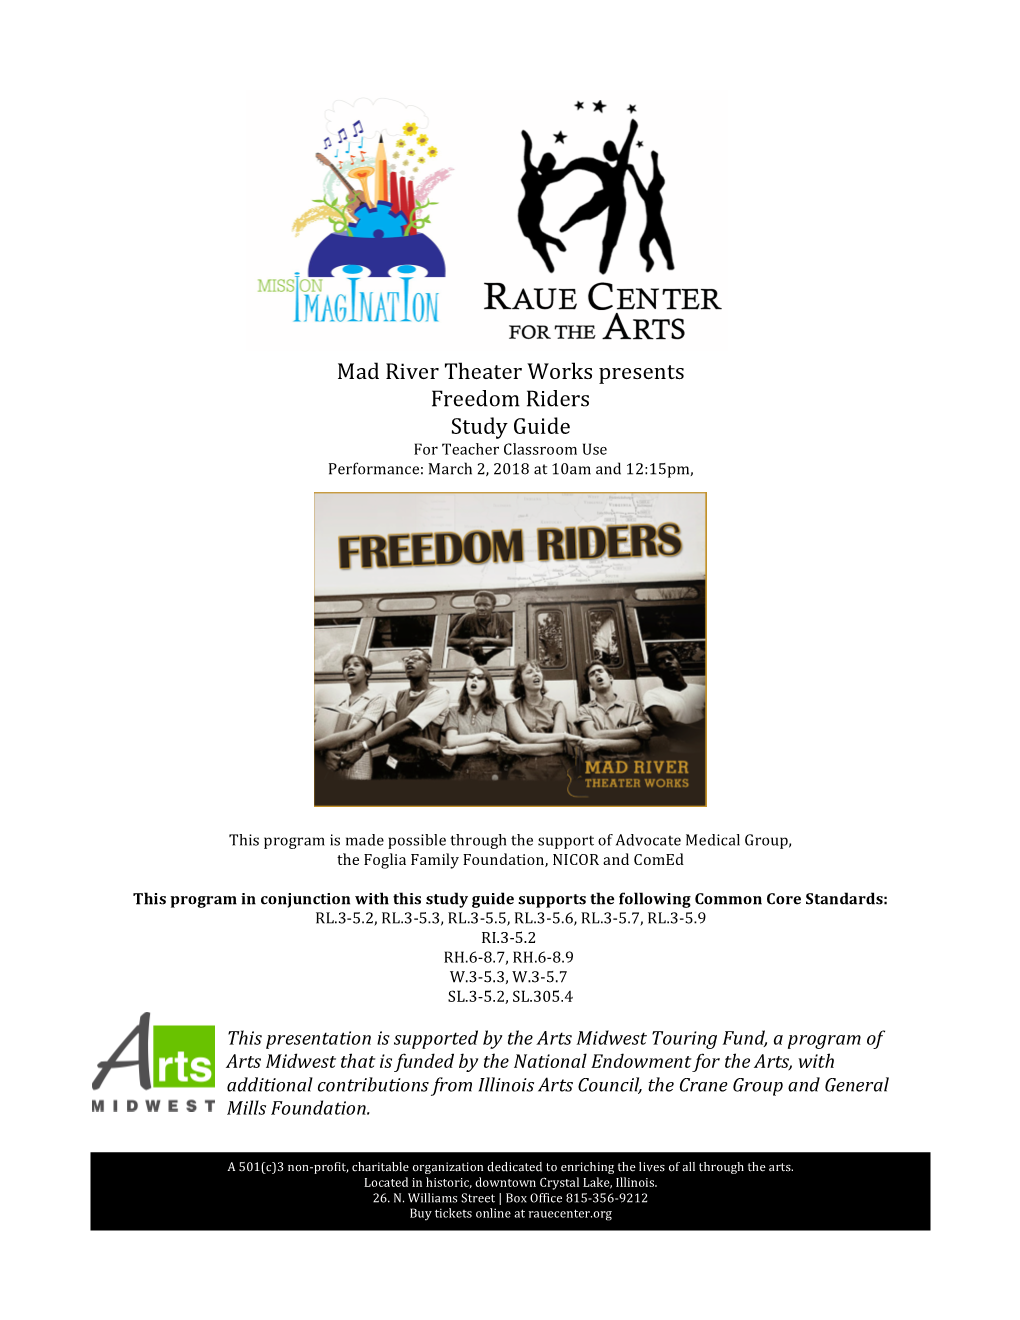 Mad River Theater Works Presents Freedom Riders Study Guide for Teacher Classroom Use Performance: March 2, 2018 at 10Am and 12:15Pm